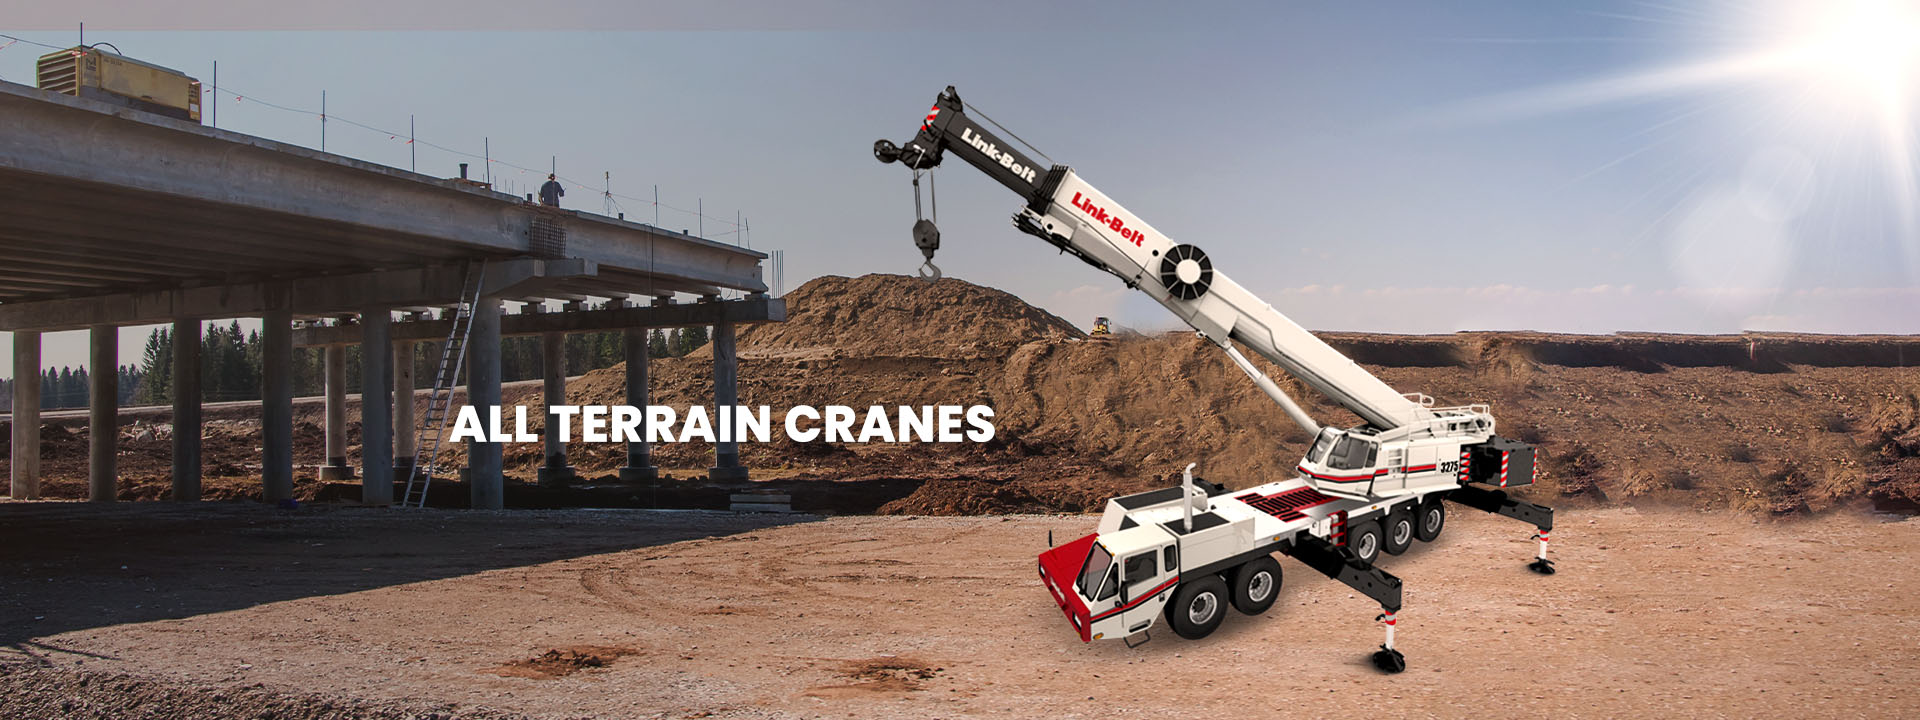 5 4 main types of mobile cranes commonly used in construction